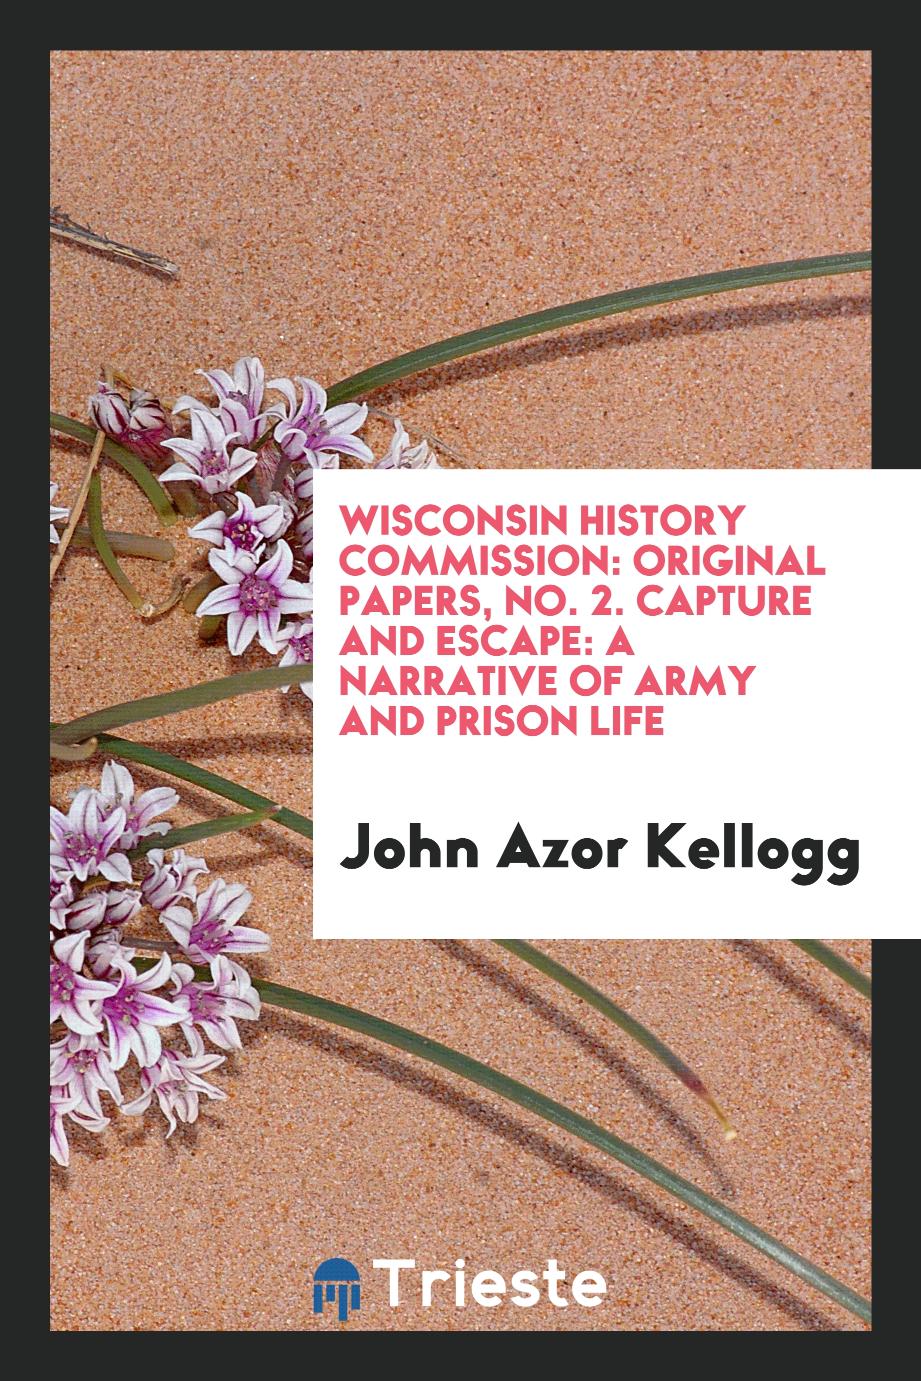 Wisconsin History Commission: Original Papers, No. 2. Capture and escape: a narrative of army and prison life